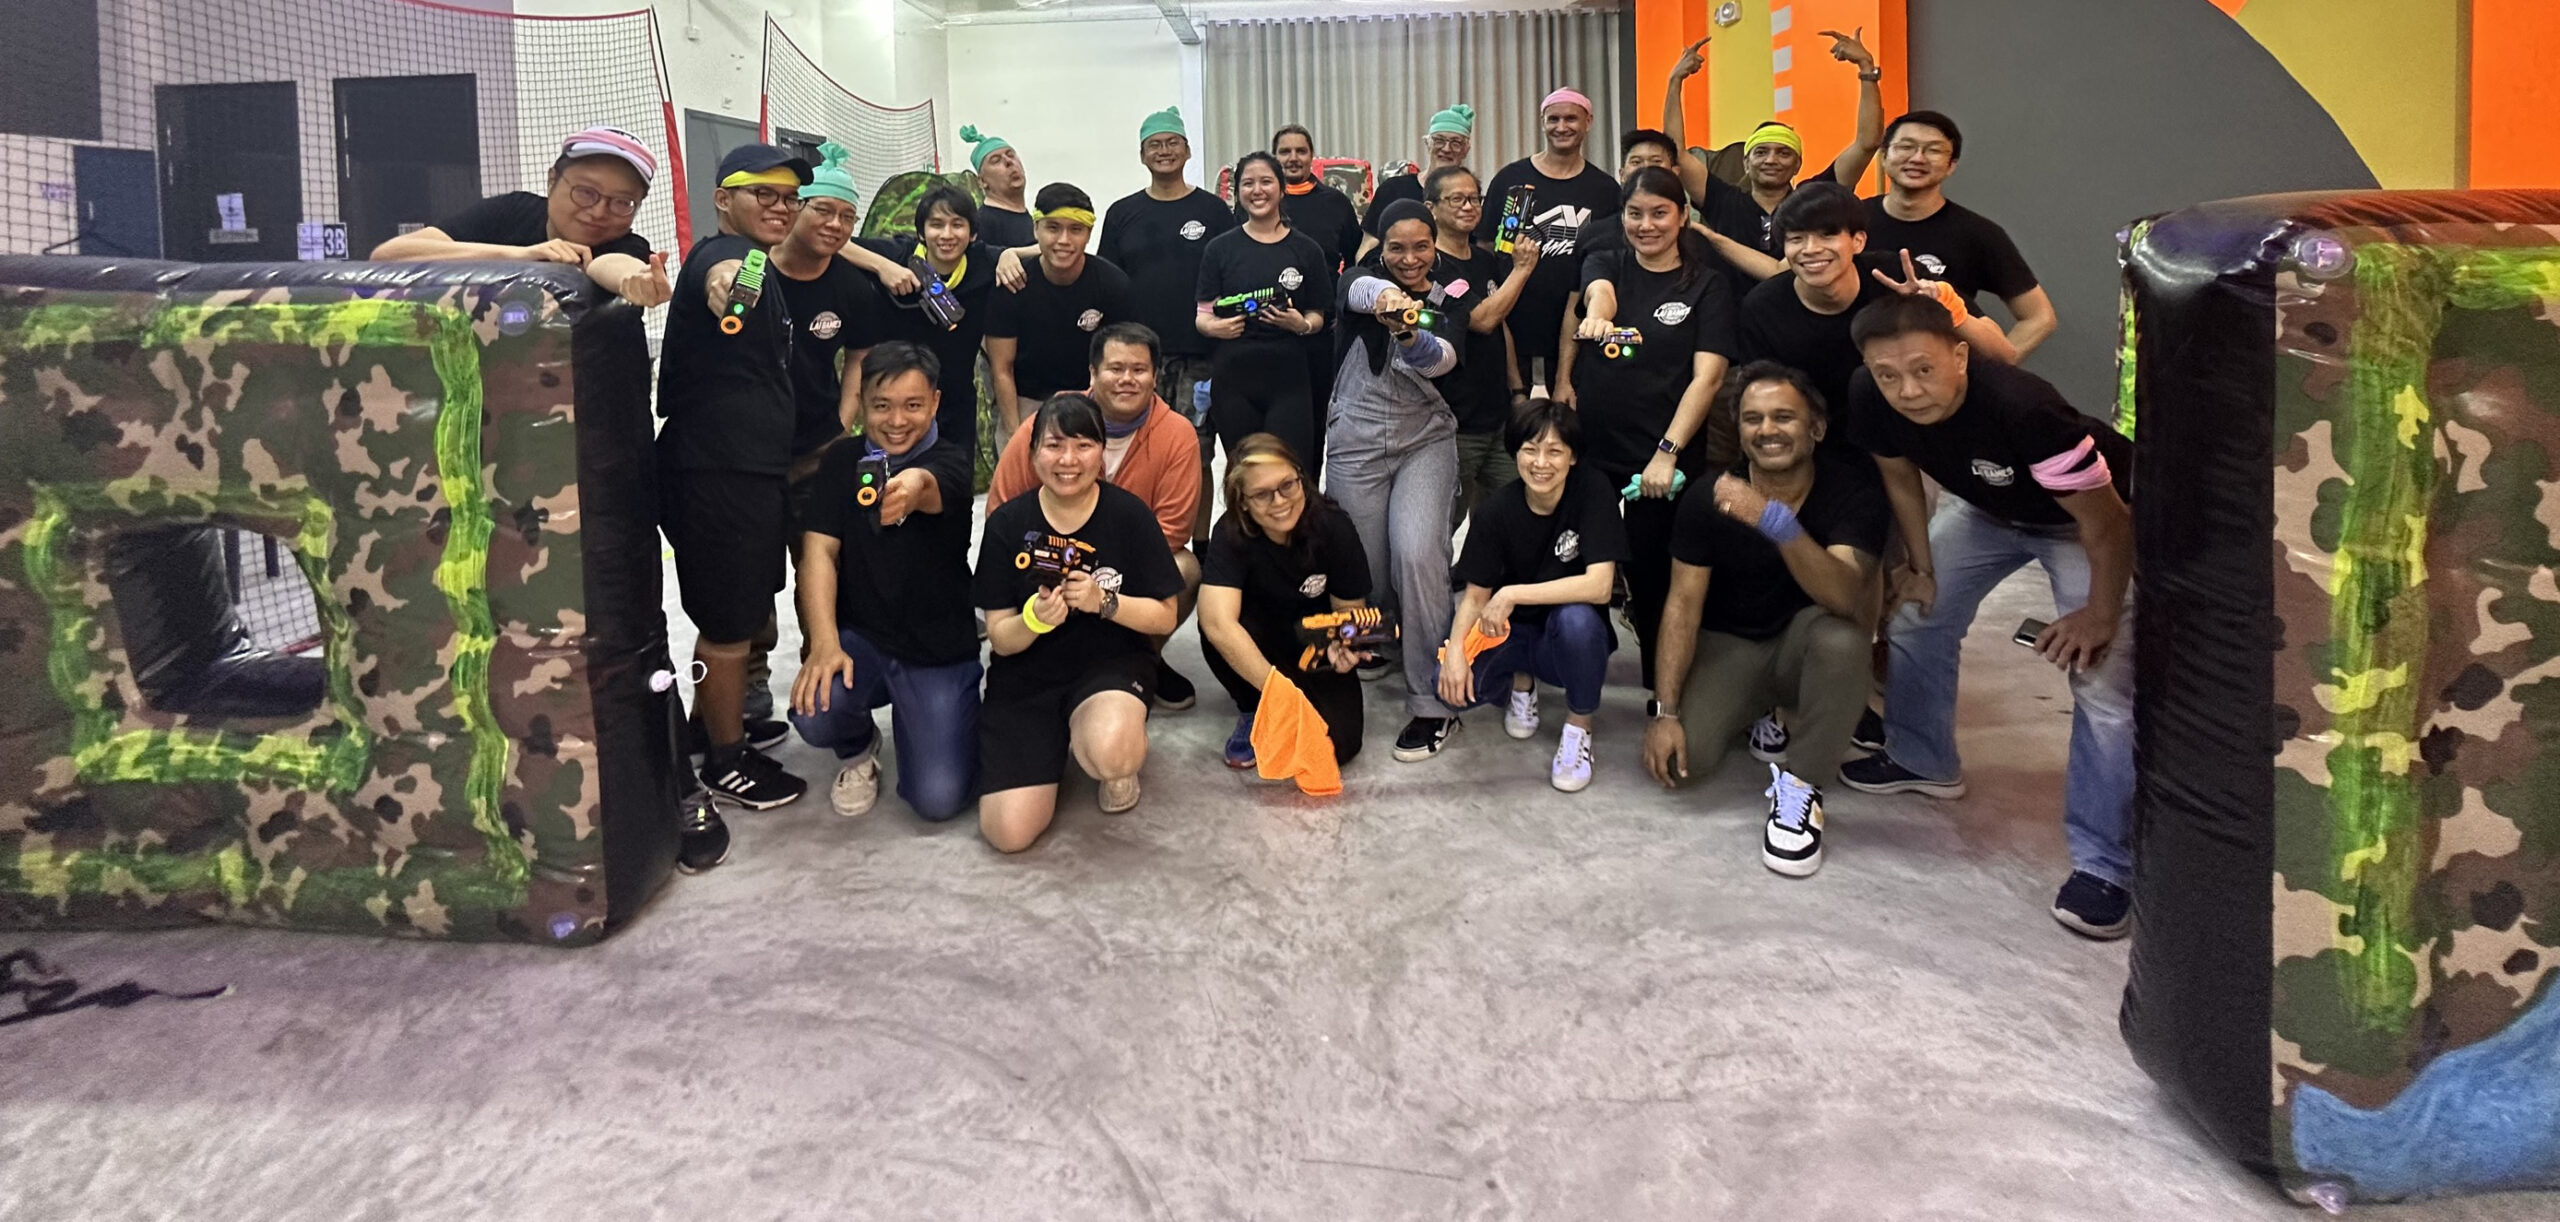 LAI Games Singapore team plays laser tag in the US.